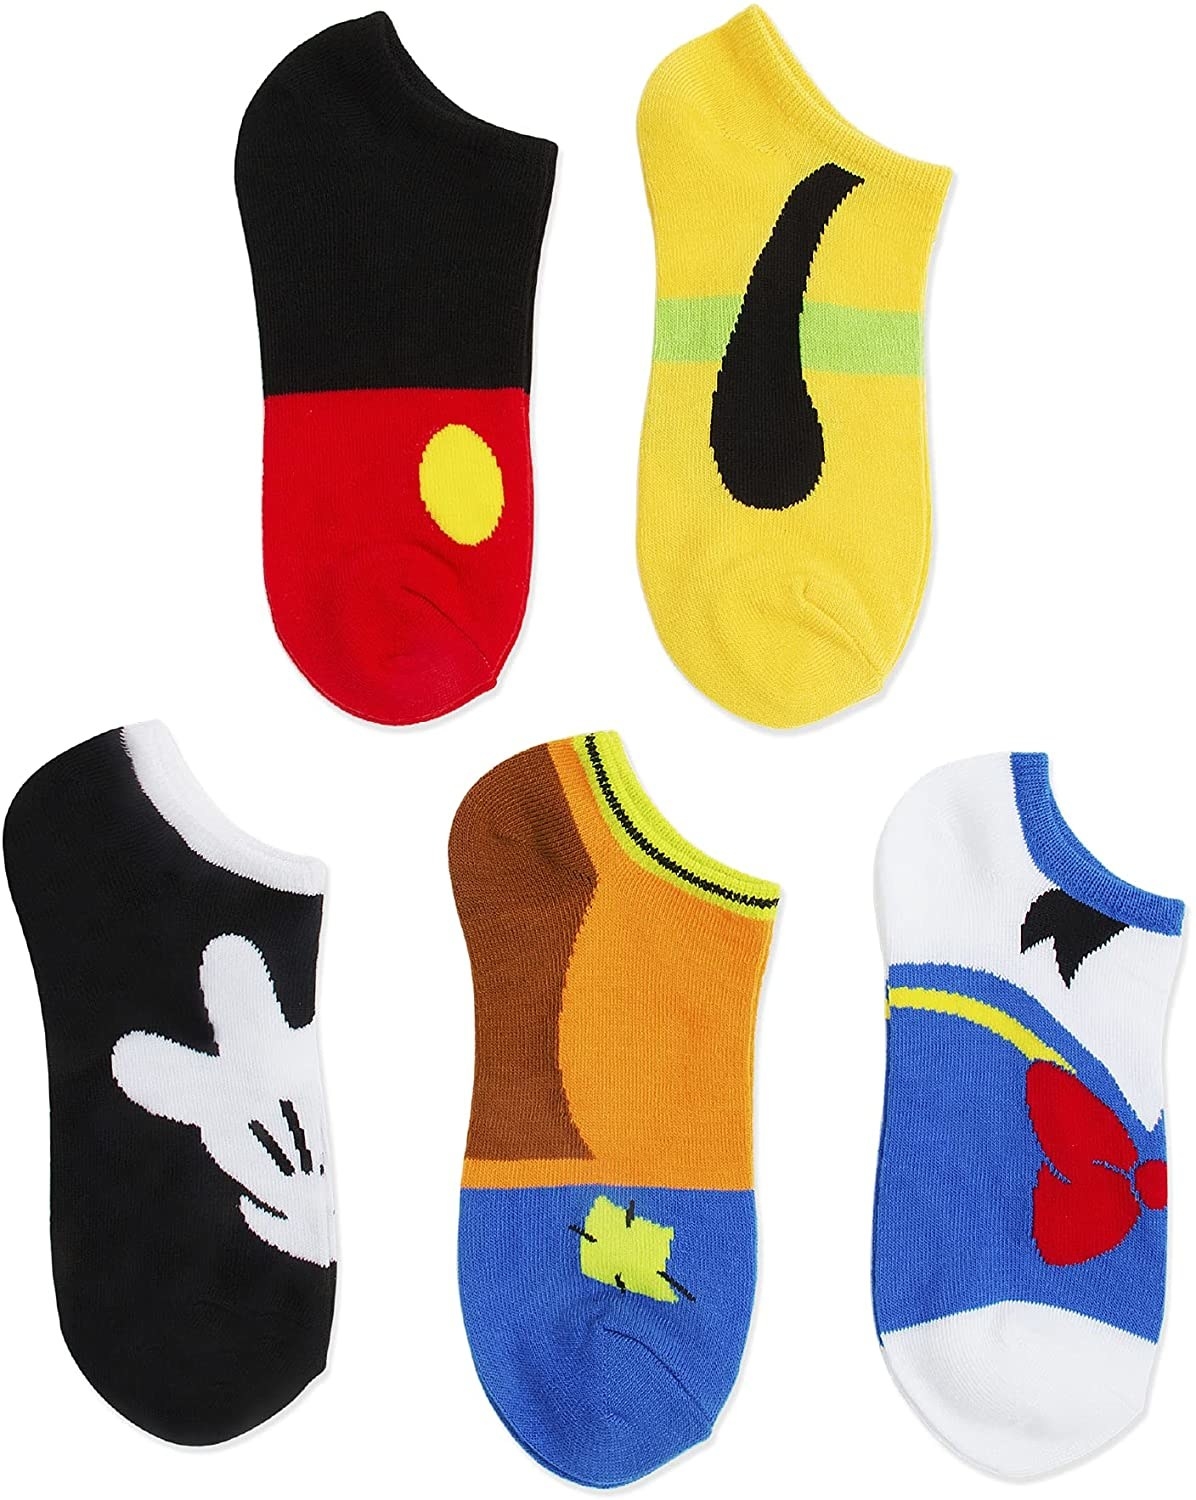 socks with motifs inspired by mickey donald pluto and goofy